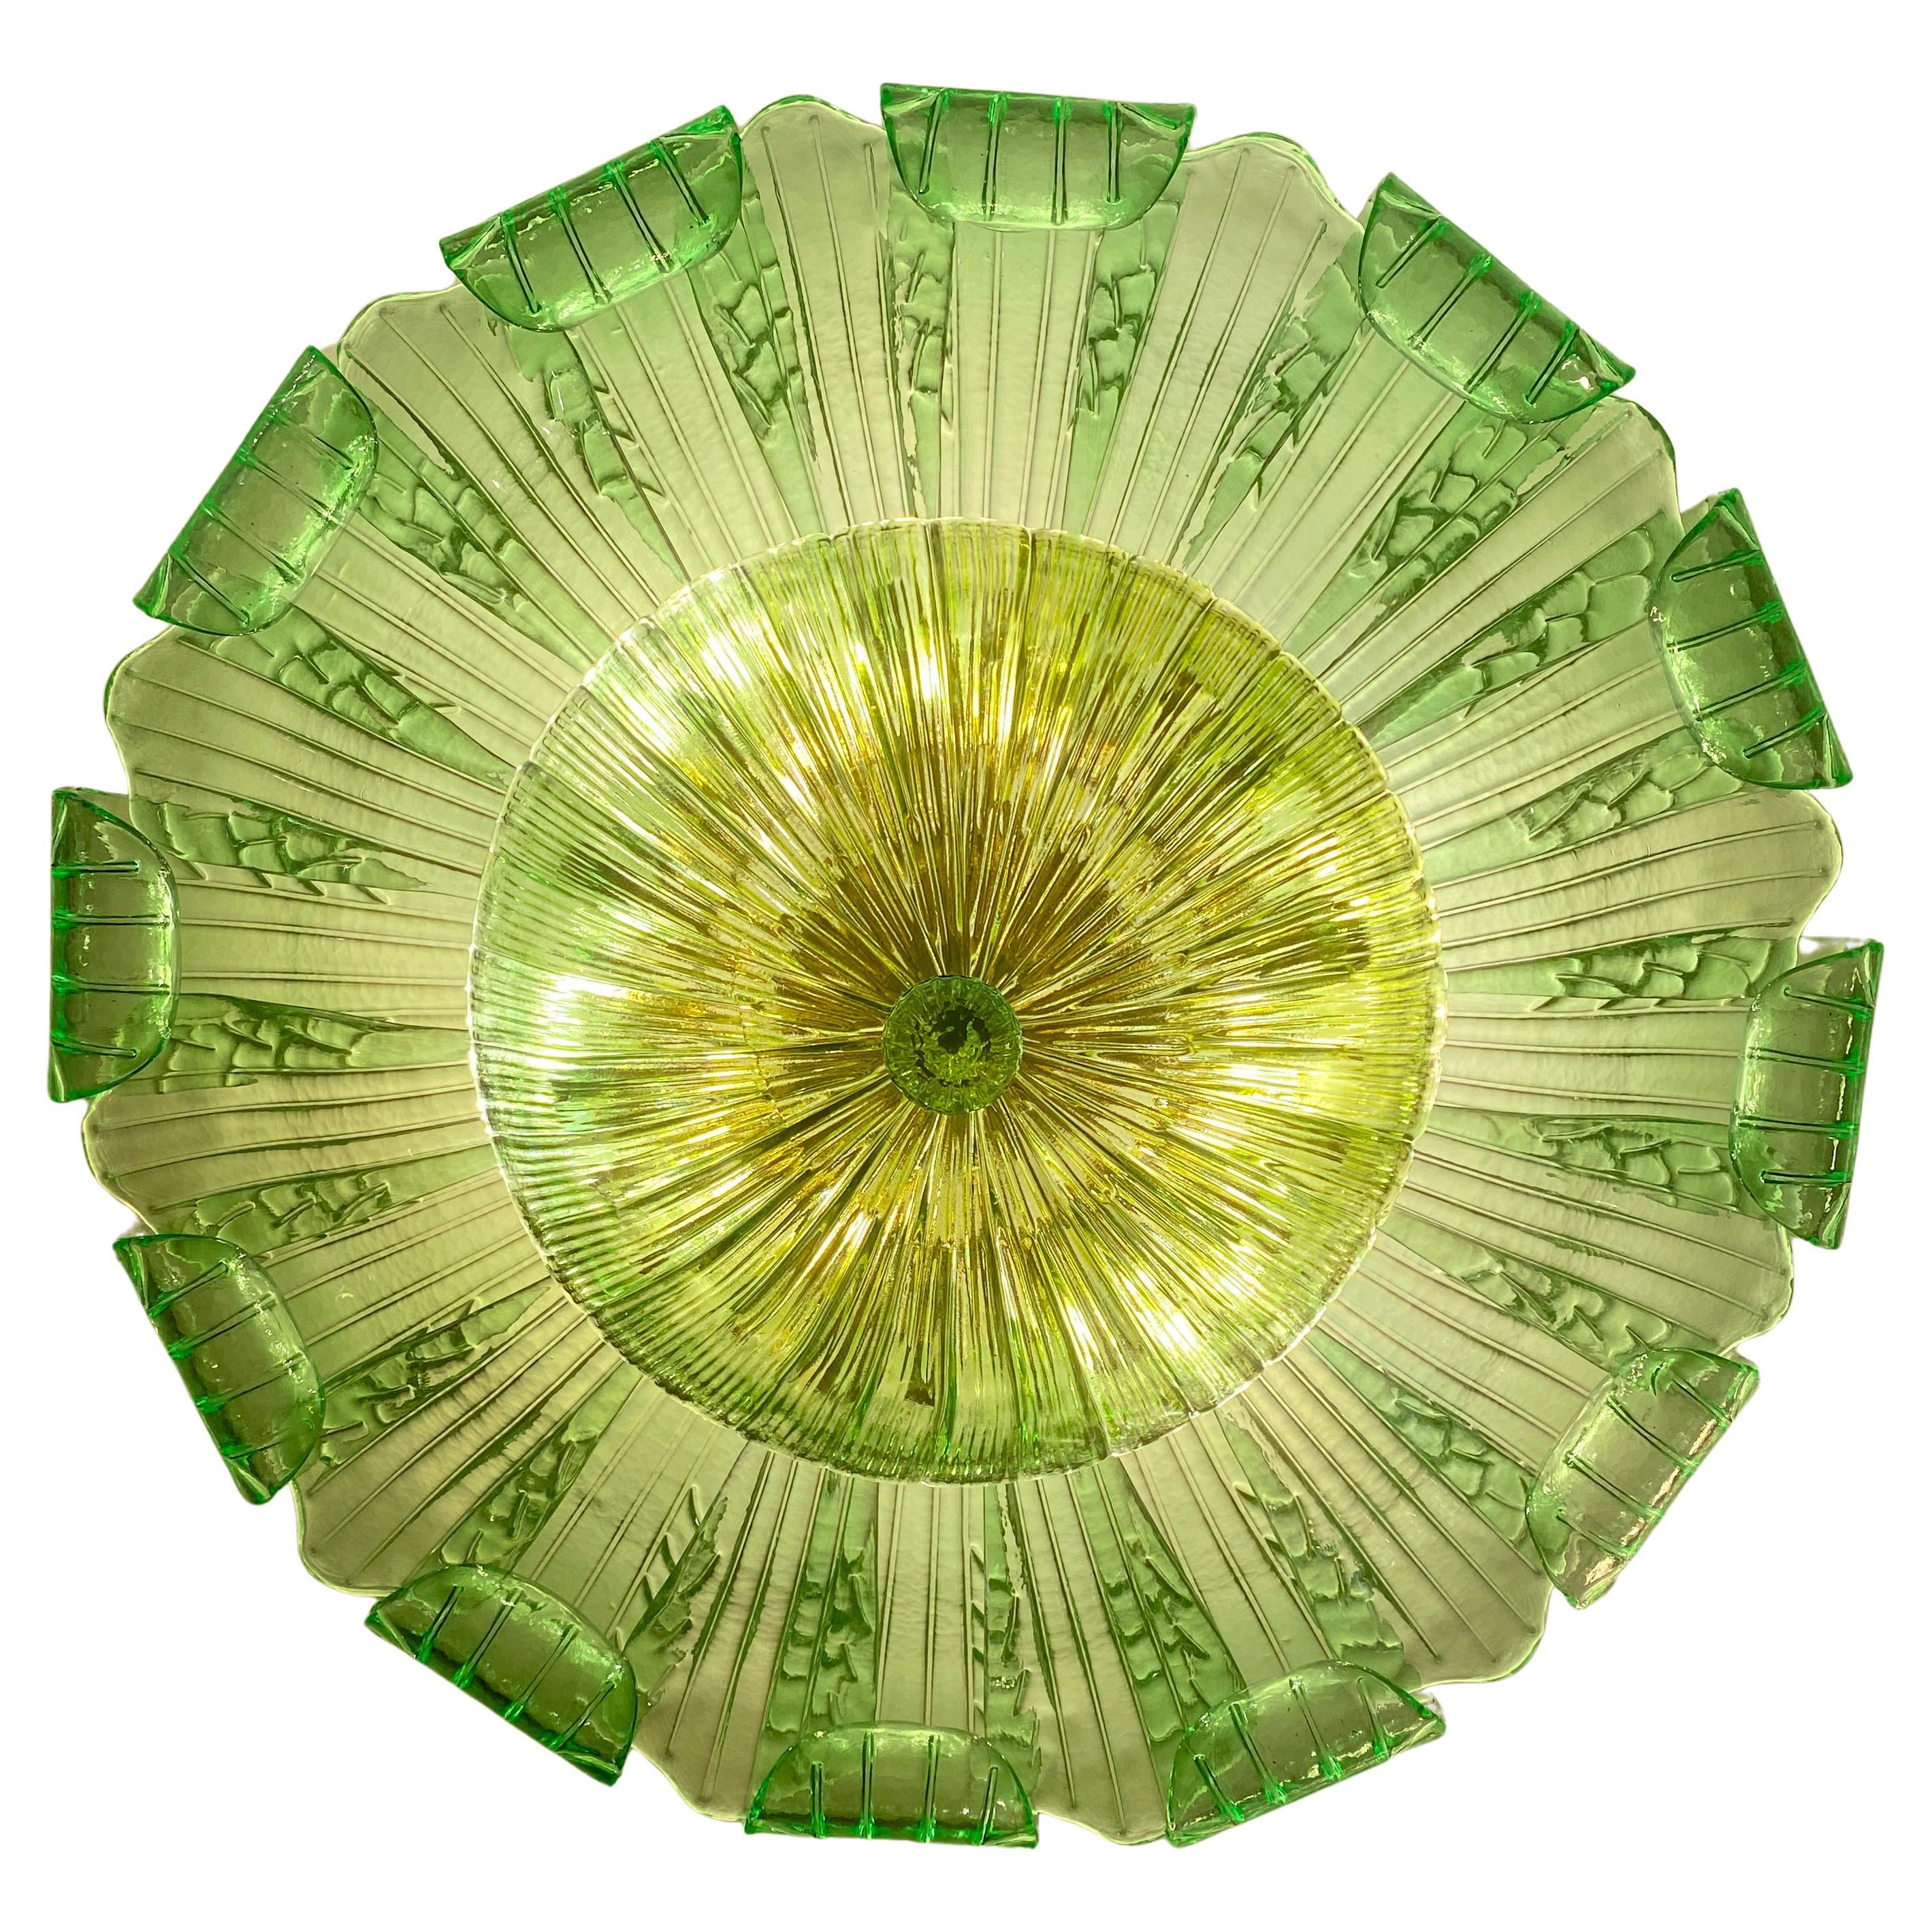 Realized in pure Emerald green color Murano glass consists of 24 large hand-blown leaves.
 The structure is gilt-metal. Nine E27  lights bulbs  spread a magical light.
 Wattage 4-6 W 
 Weight ; 28 kg

Available also a pair.
This light fixture can be